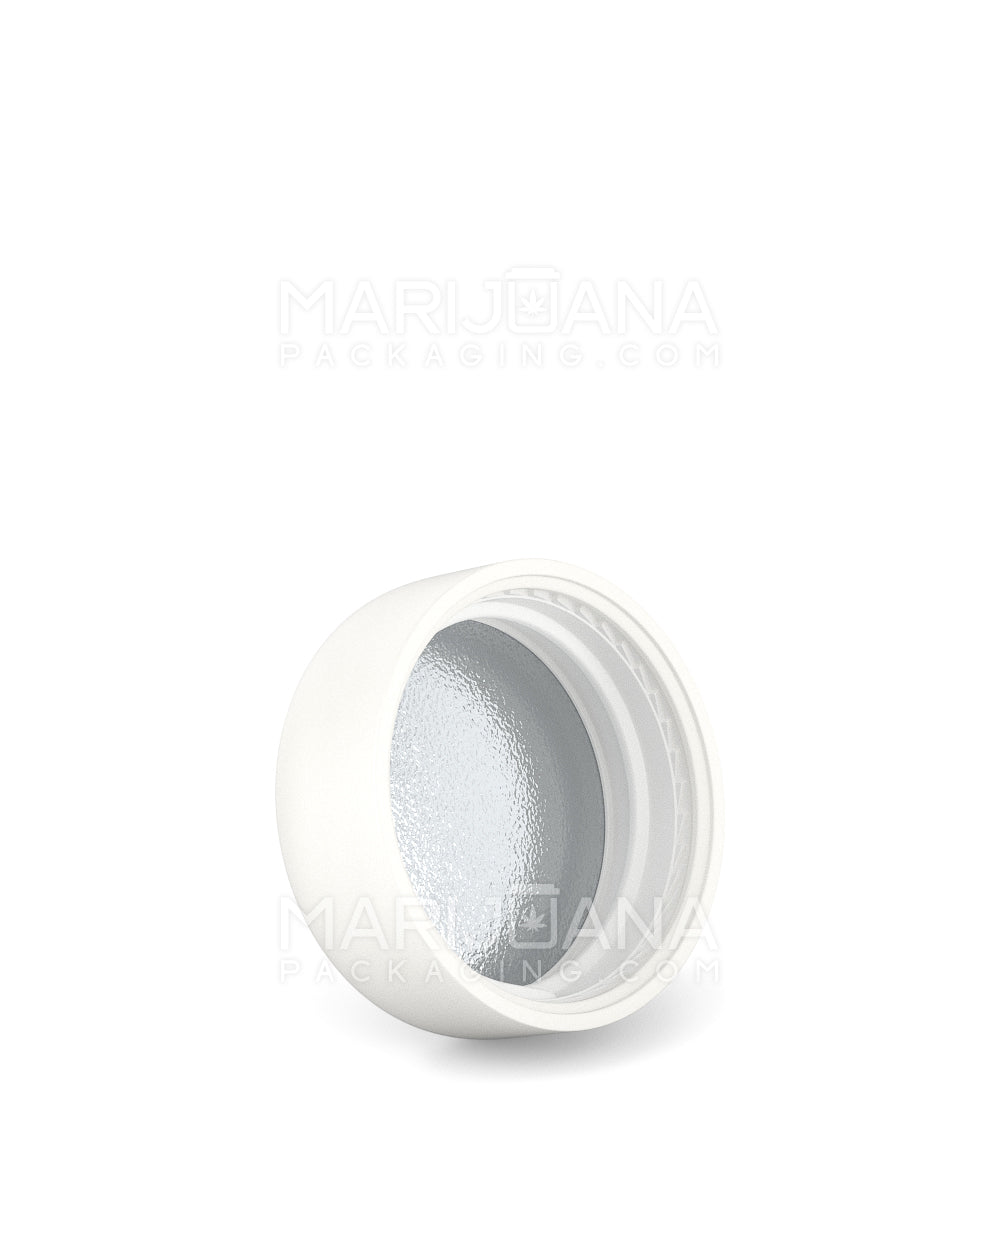 POLLEN GEAR | HiLine Child Resistant Smooth Push Down & Turn Plastic Round Caps w/ 3-Layer Liner | 29mm - Matte White - 308 Count - 2